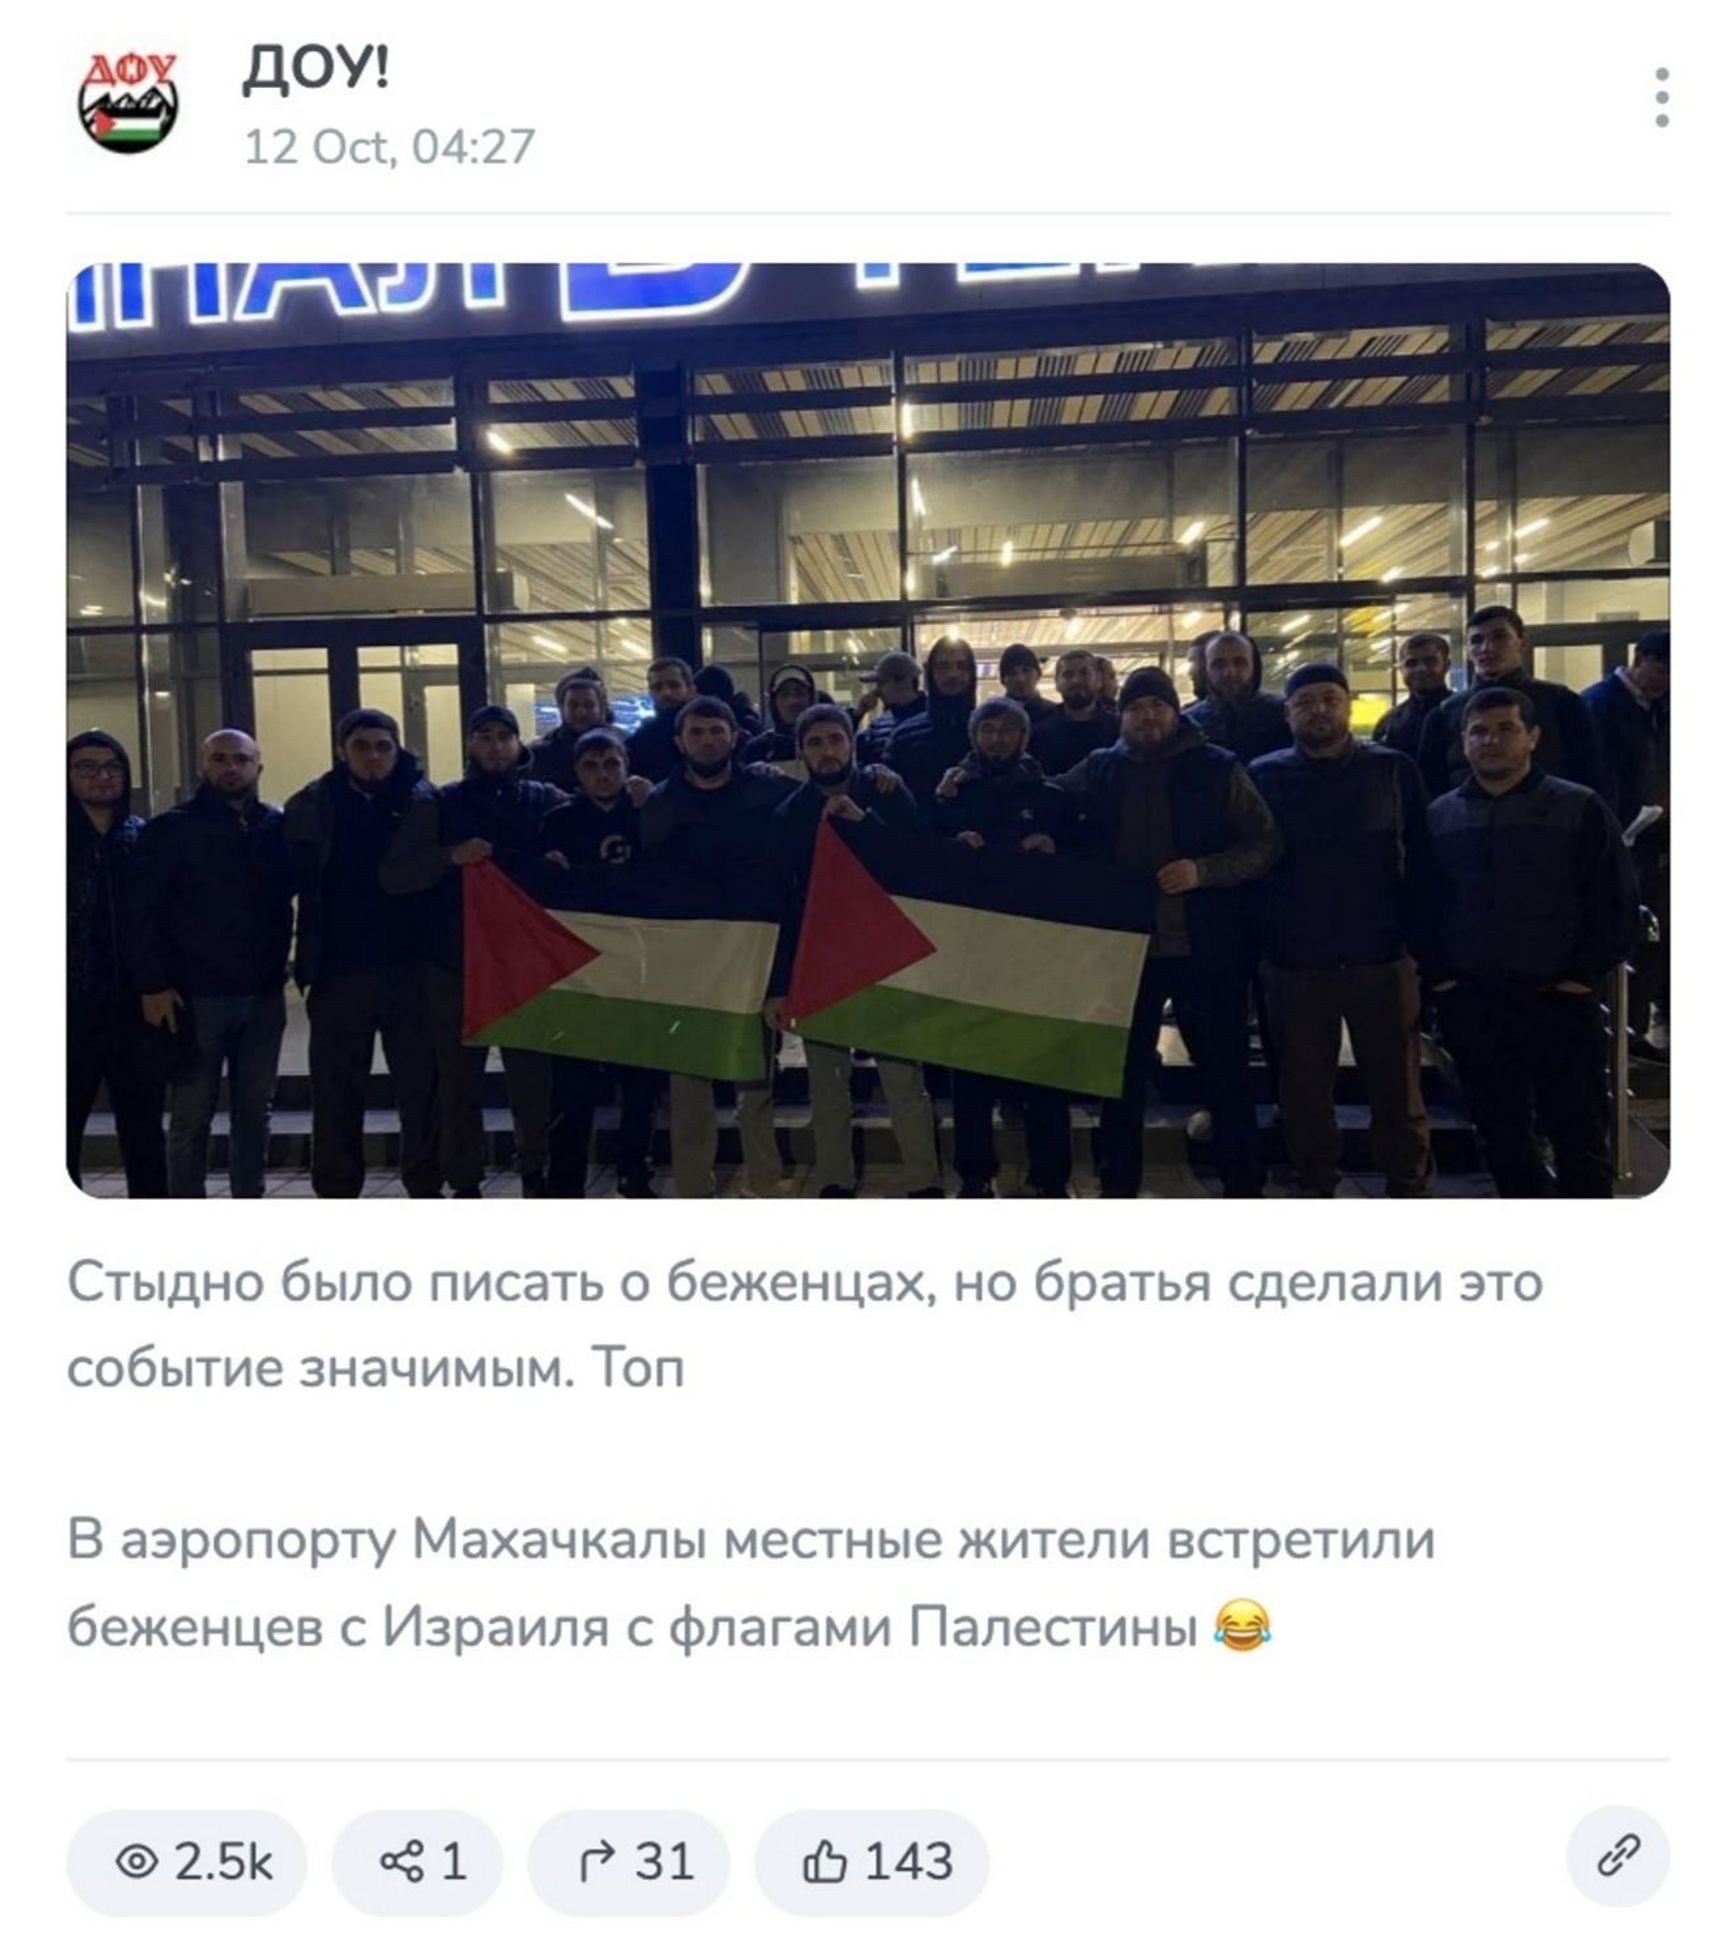 It was embarrassing to write about refugees, but our brothers made the event meaningful. Refugees from Israel were welcomed at Makhachkala airport with Palestinian flags [laughing emoji] 